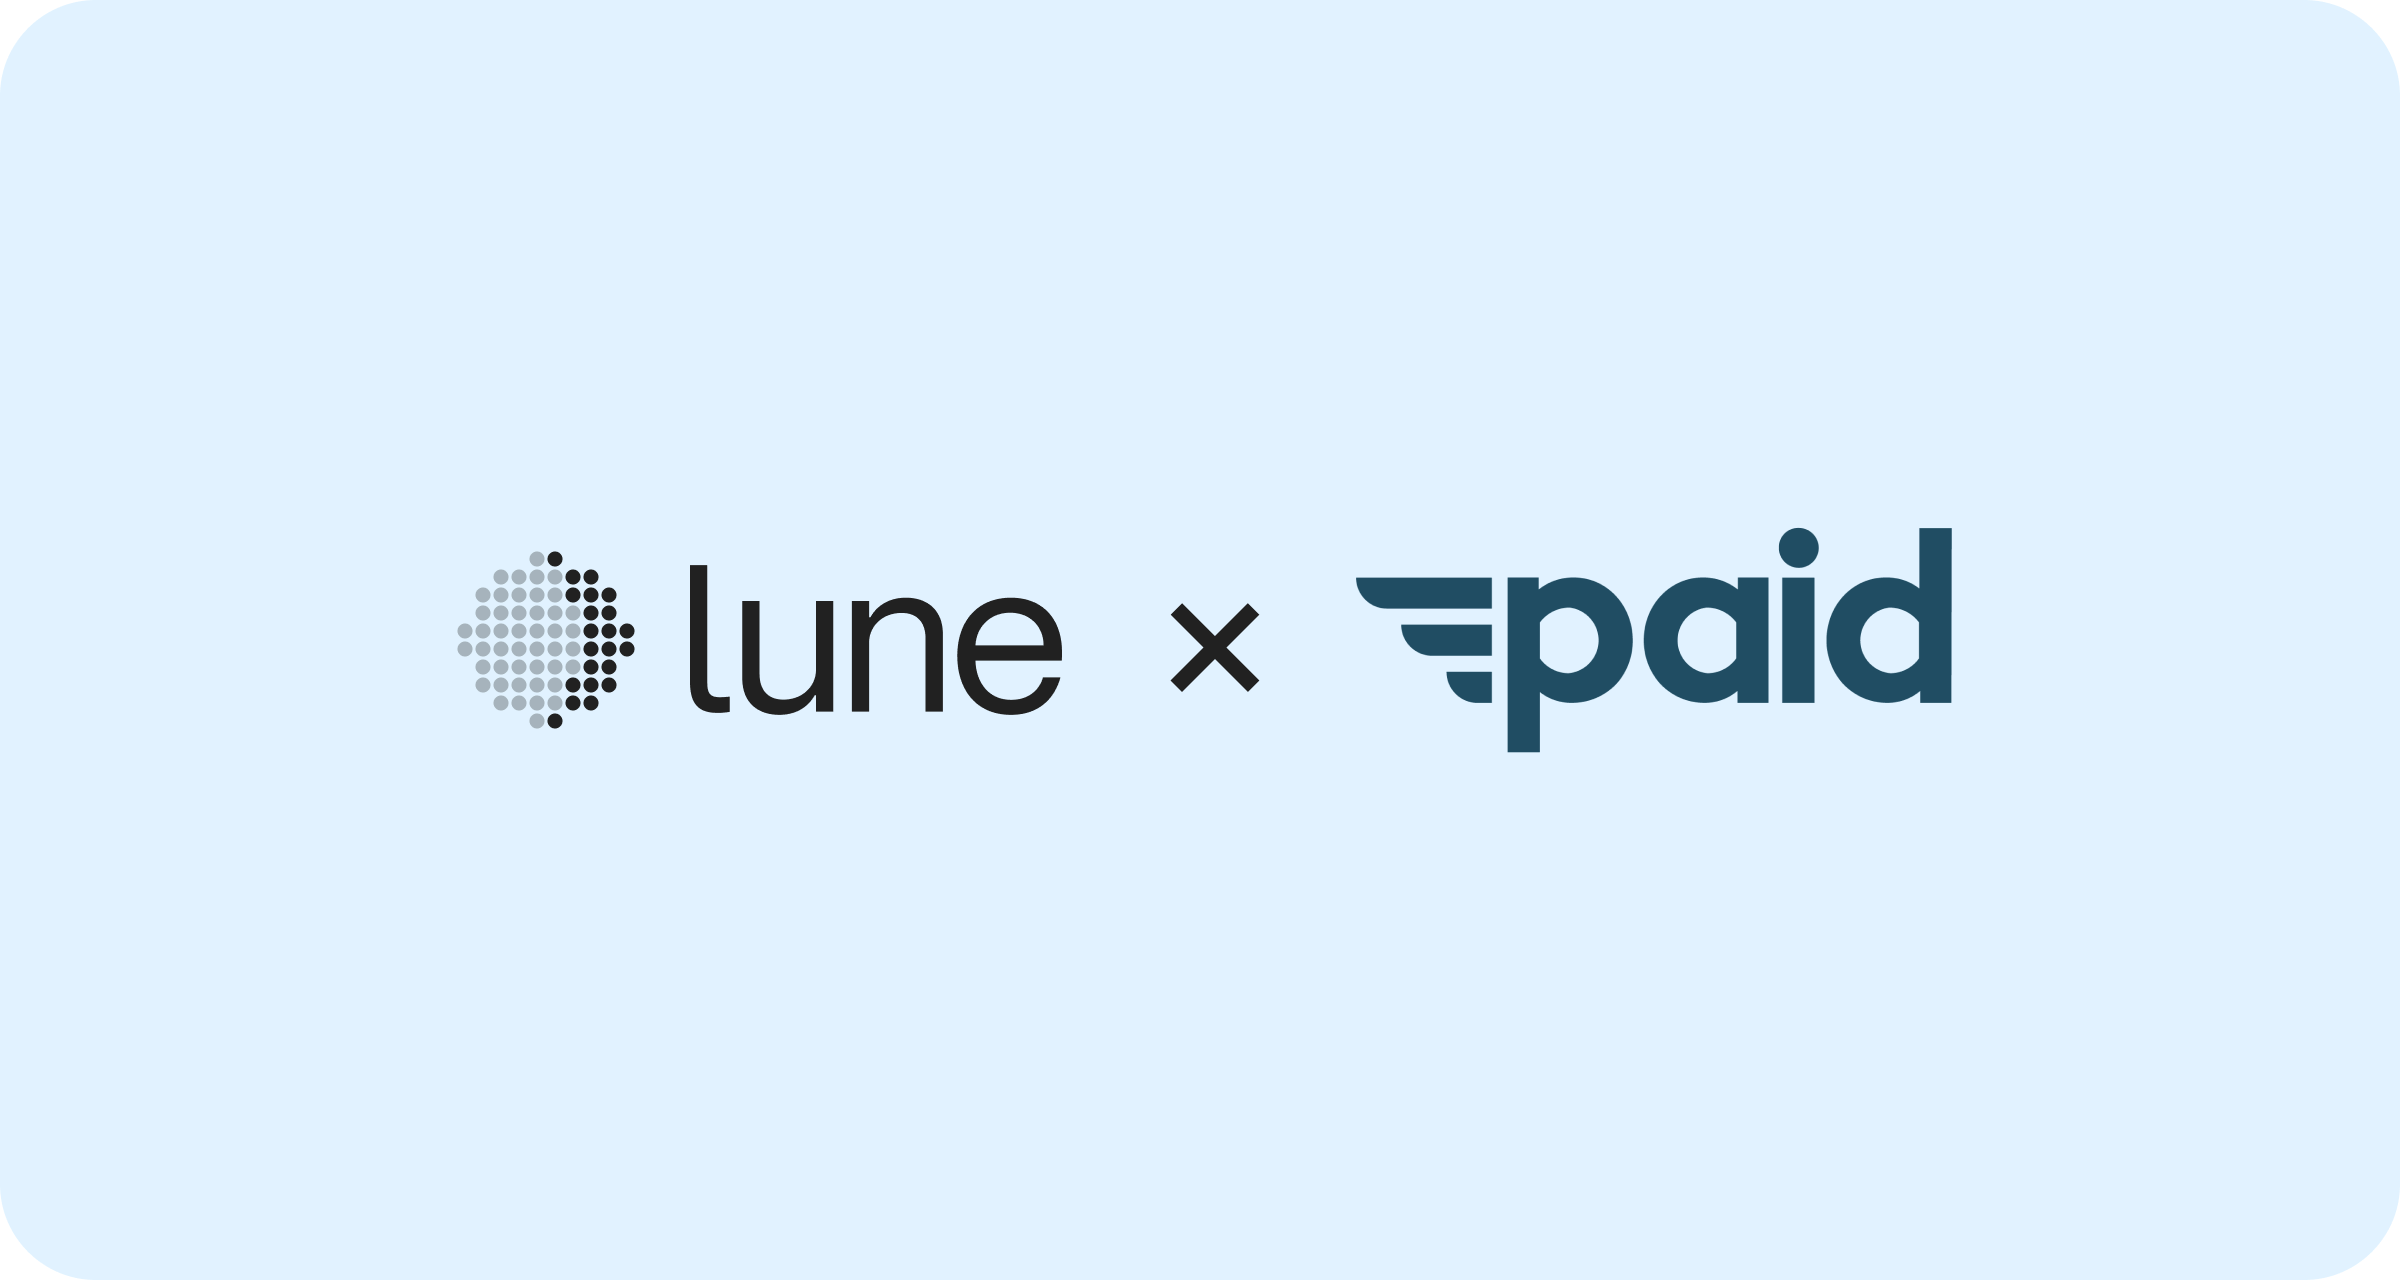 Lune x Paid